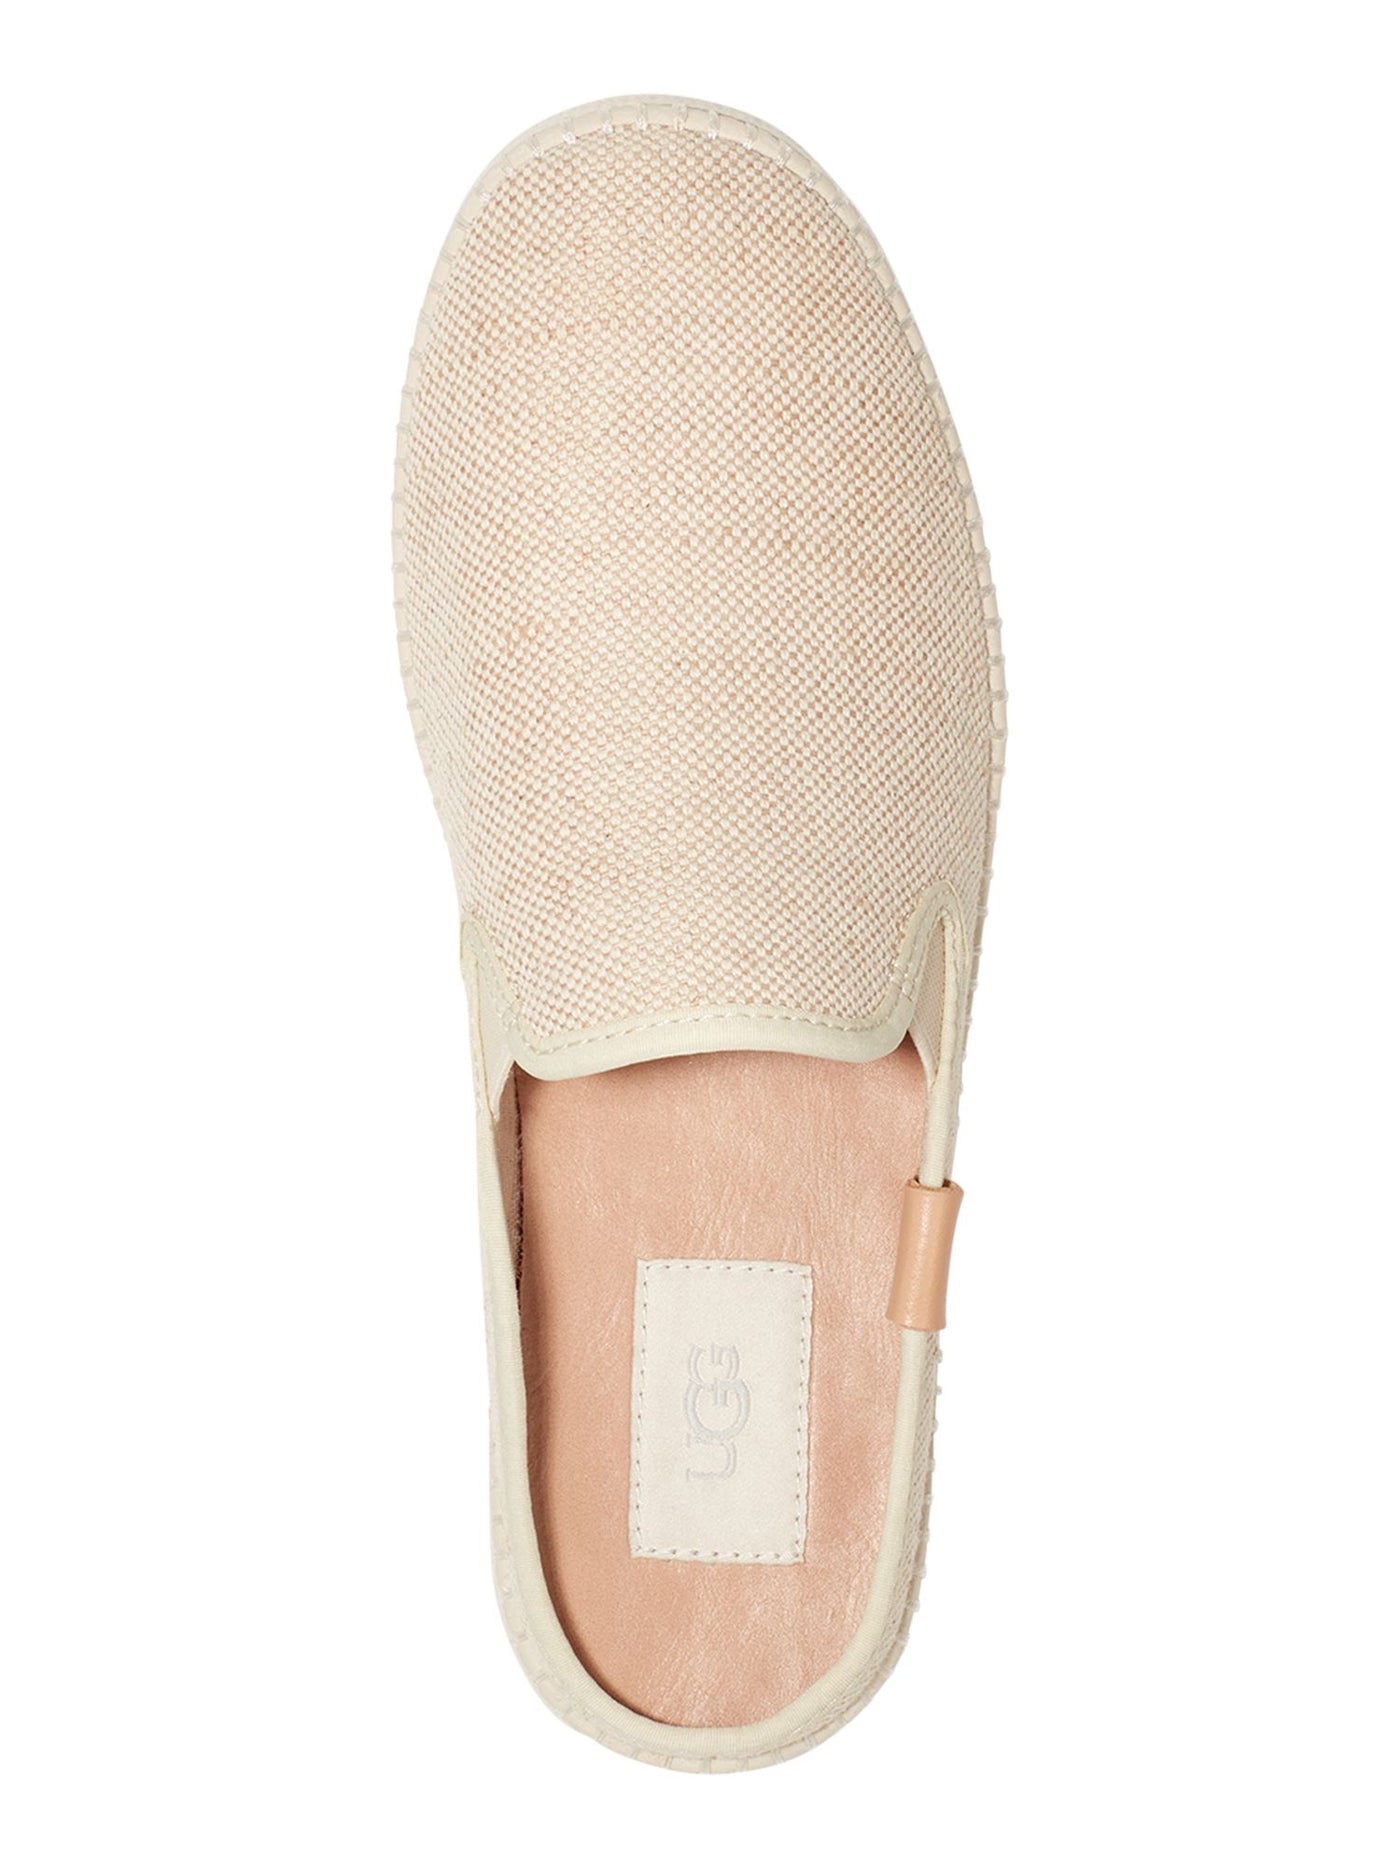 UGG Womens Beige Woven Goring Removable Insole Cushioned Delu Round Toe Platform Slip On Mules 9